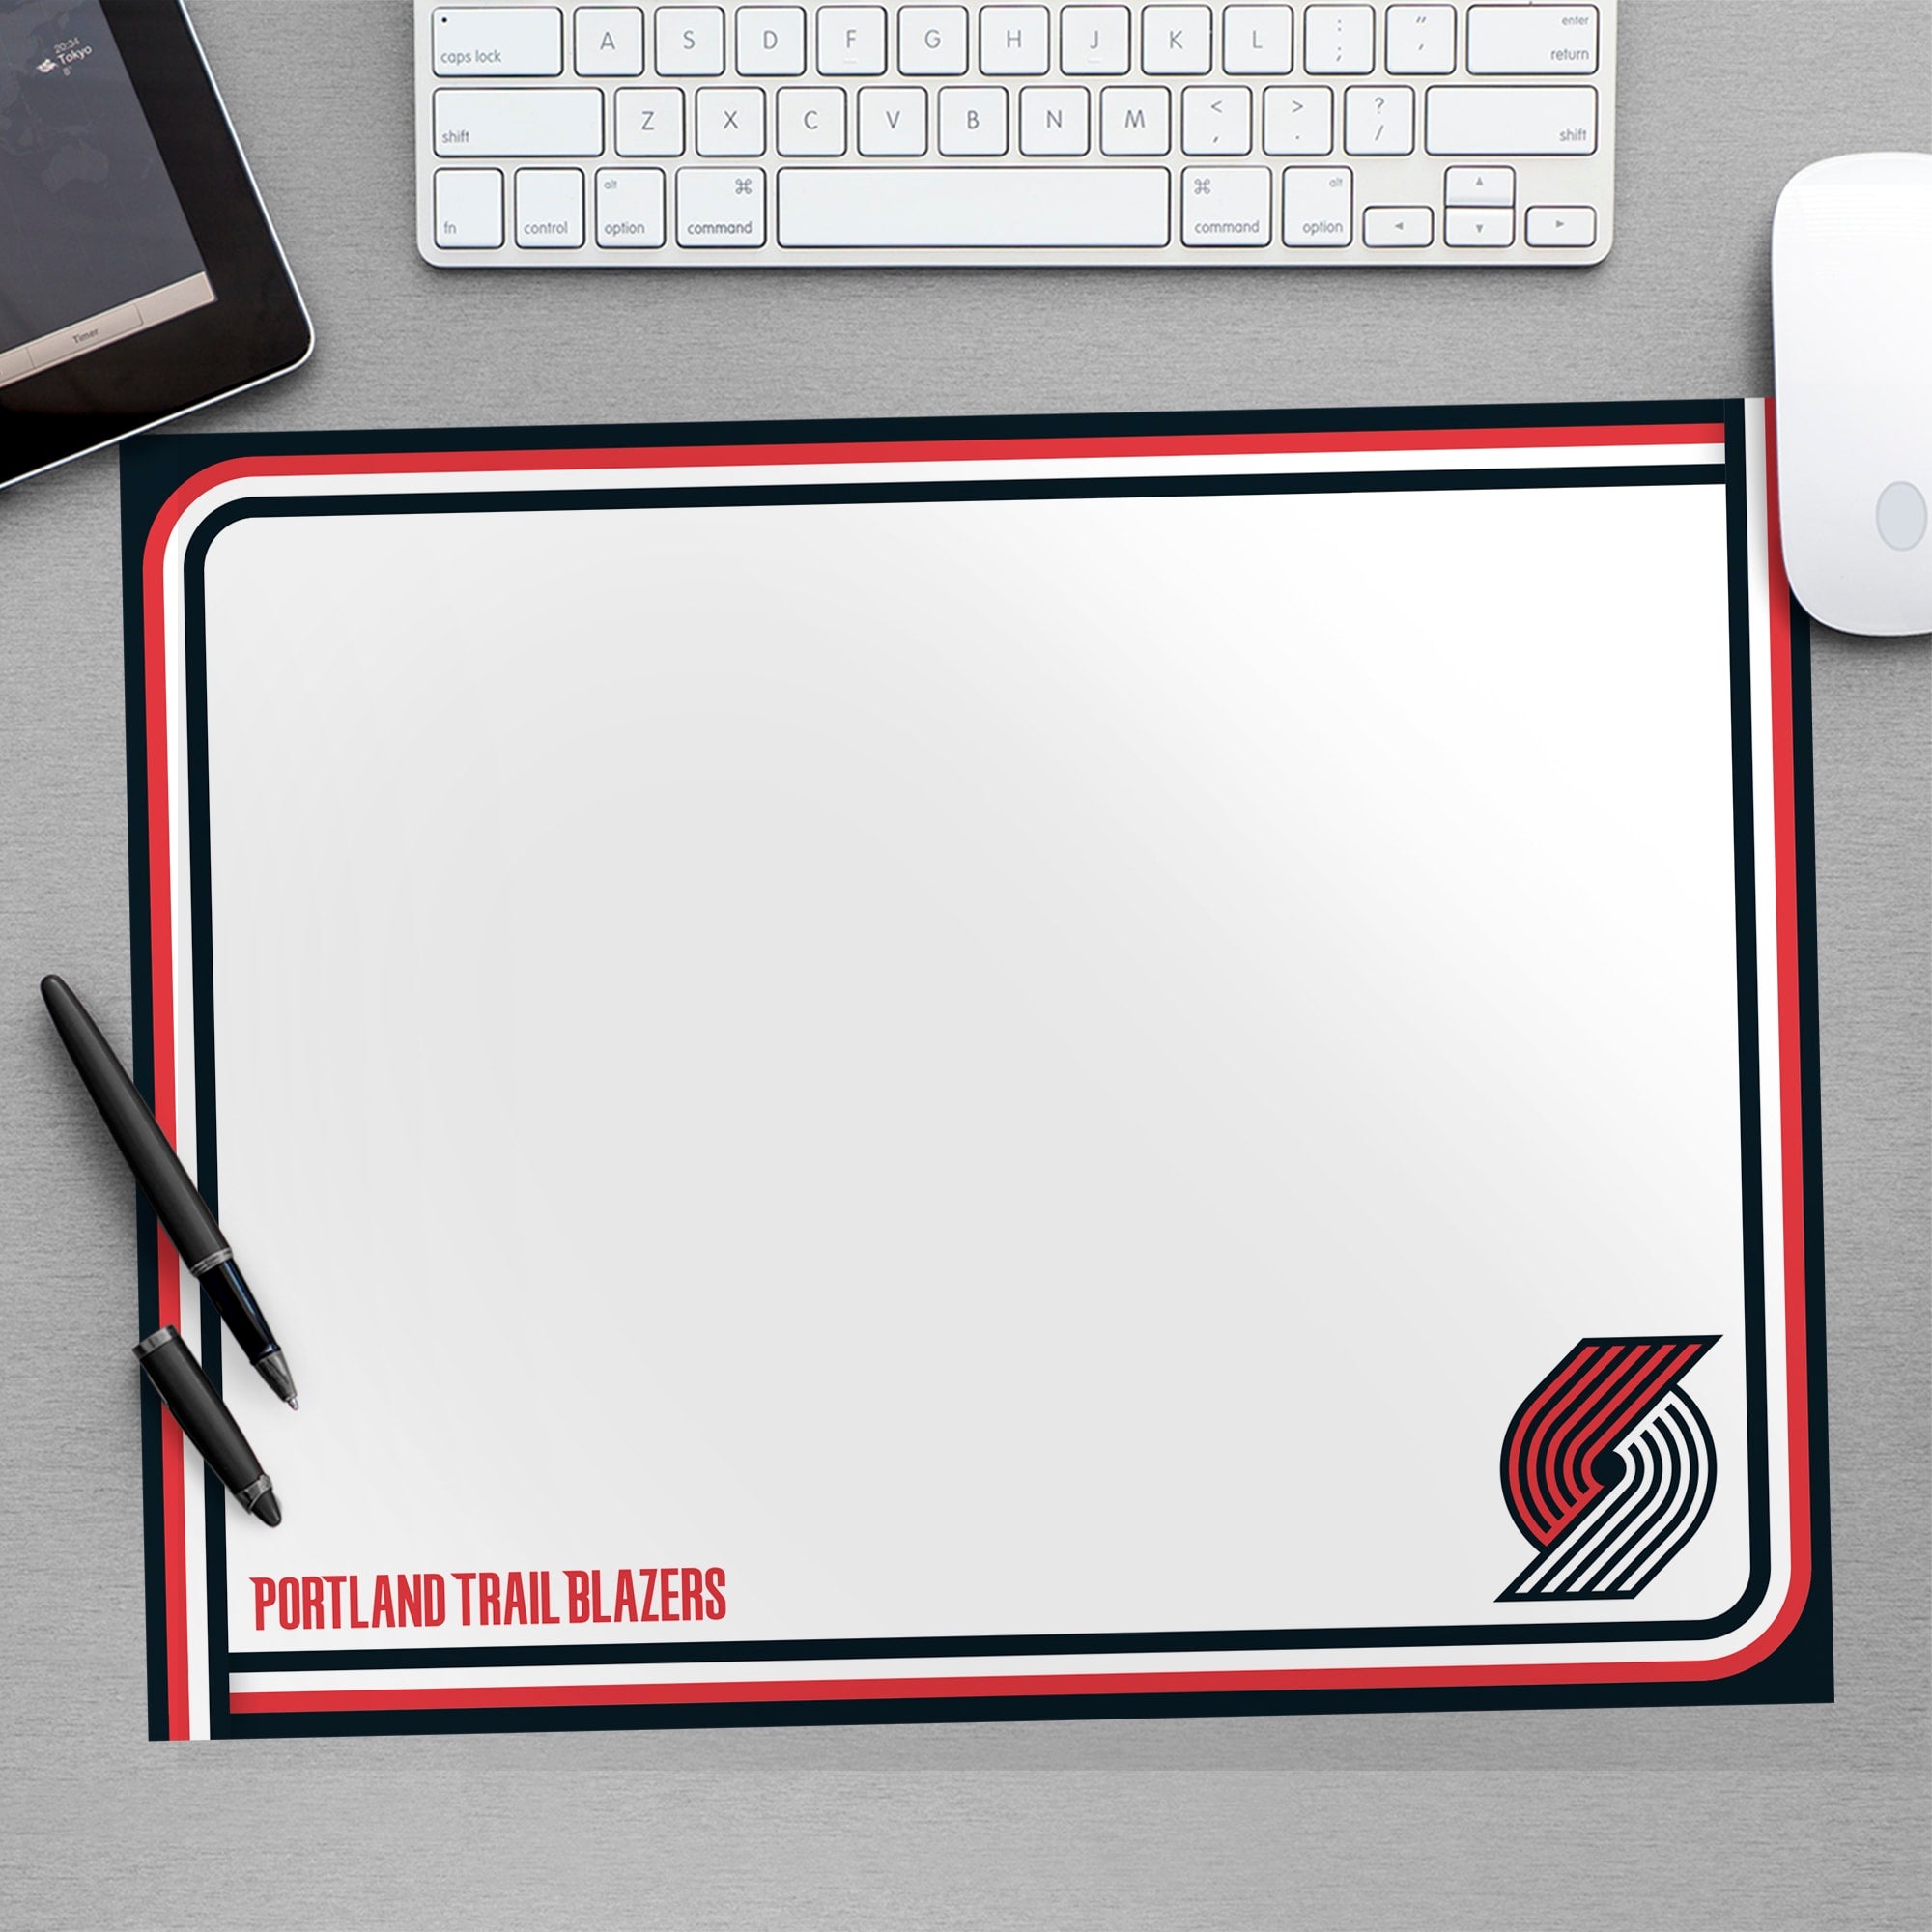 Portland Trail Blazers for Portland Trail Blazers: Dry Erase Whiteboard - Officially Licensed NBA Removable Wall Decal Large by